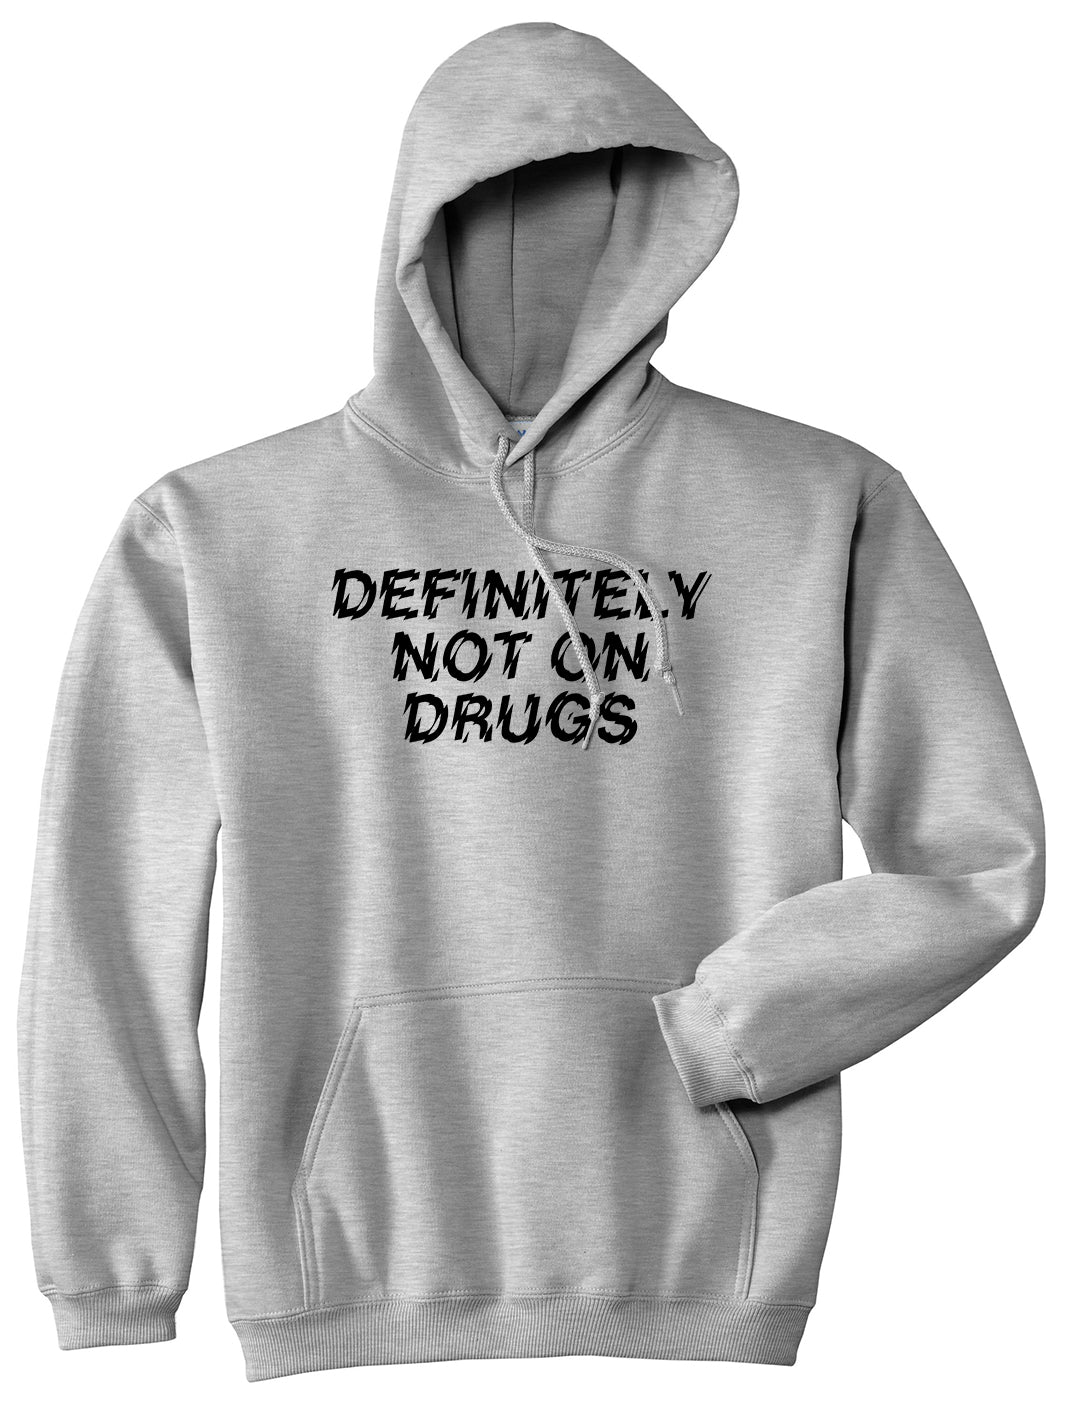 Definitely Not On Drugs Festival Mens Grey Pullover Hoodie by KINGS OF NY